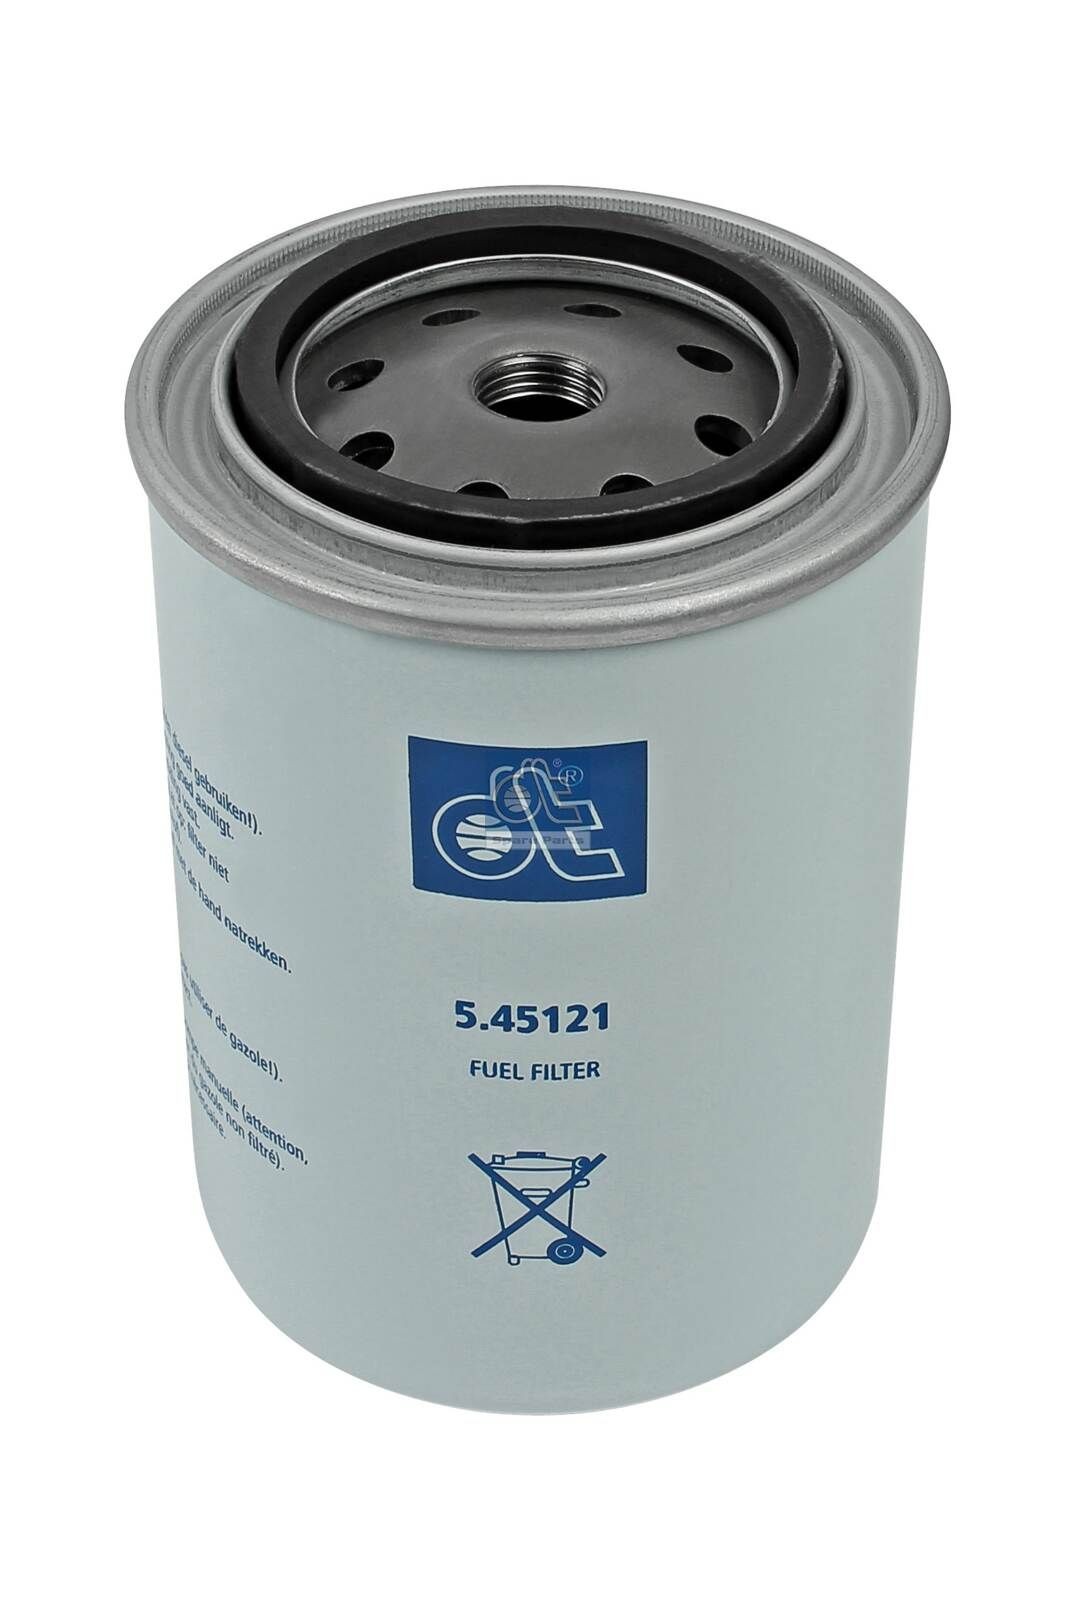 WDK 940/5 DT Spare Parts 5.45121 Fuel filter 1050595